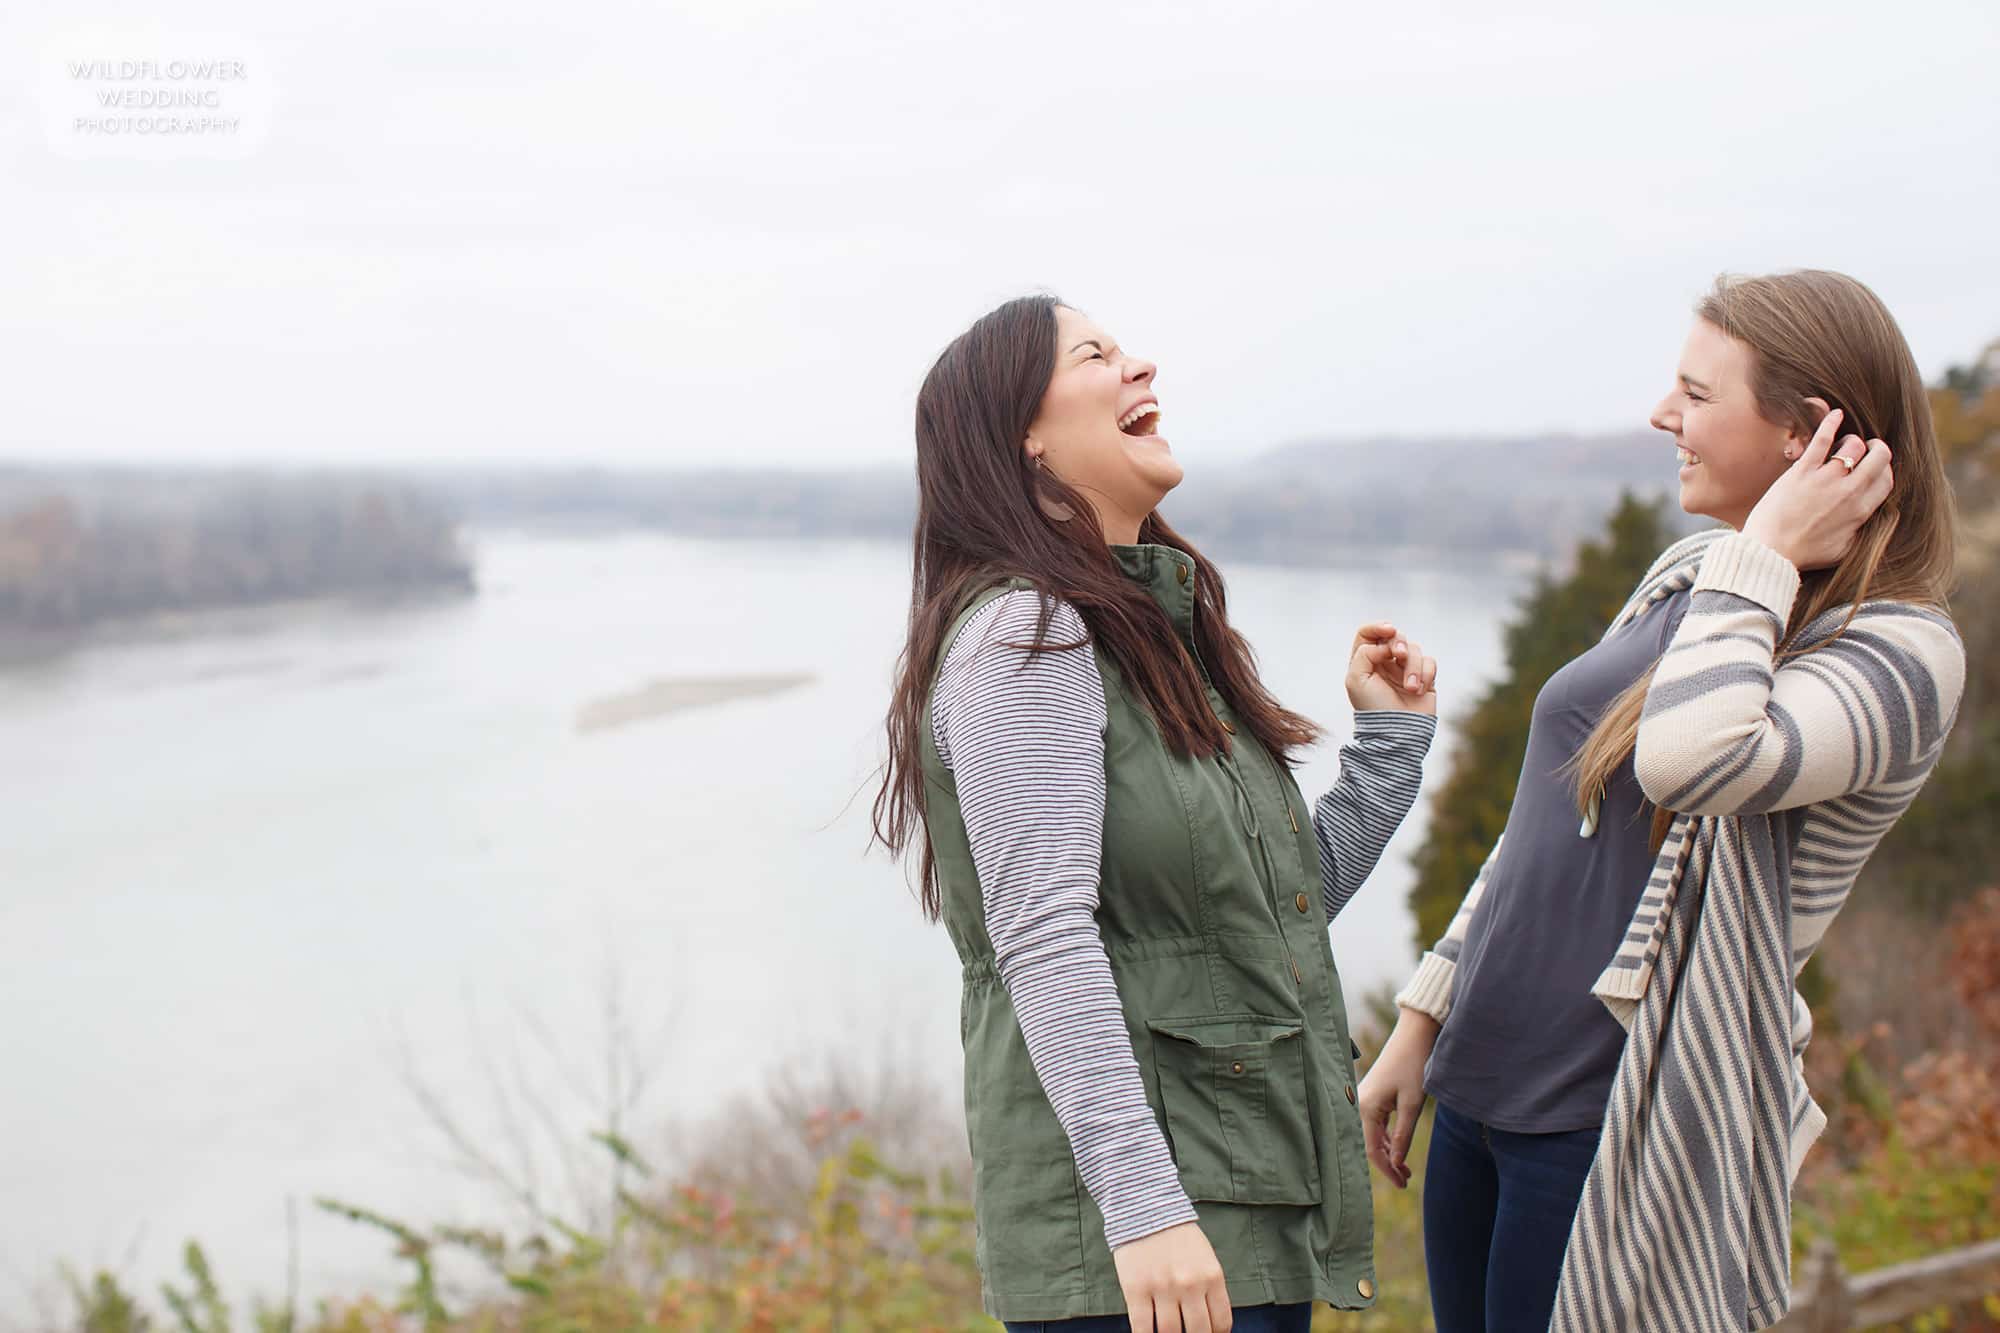 After she said yes to the wedding proposal, these two best friends laughed above the Missouri River at Les Bourgeois.